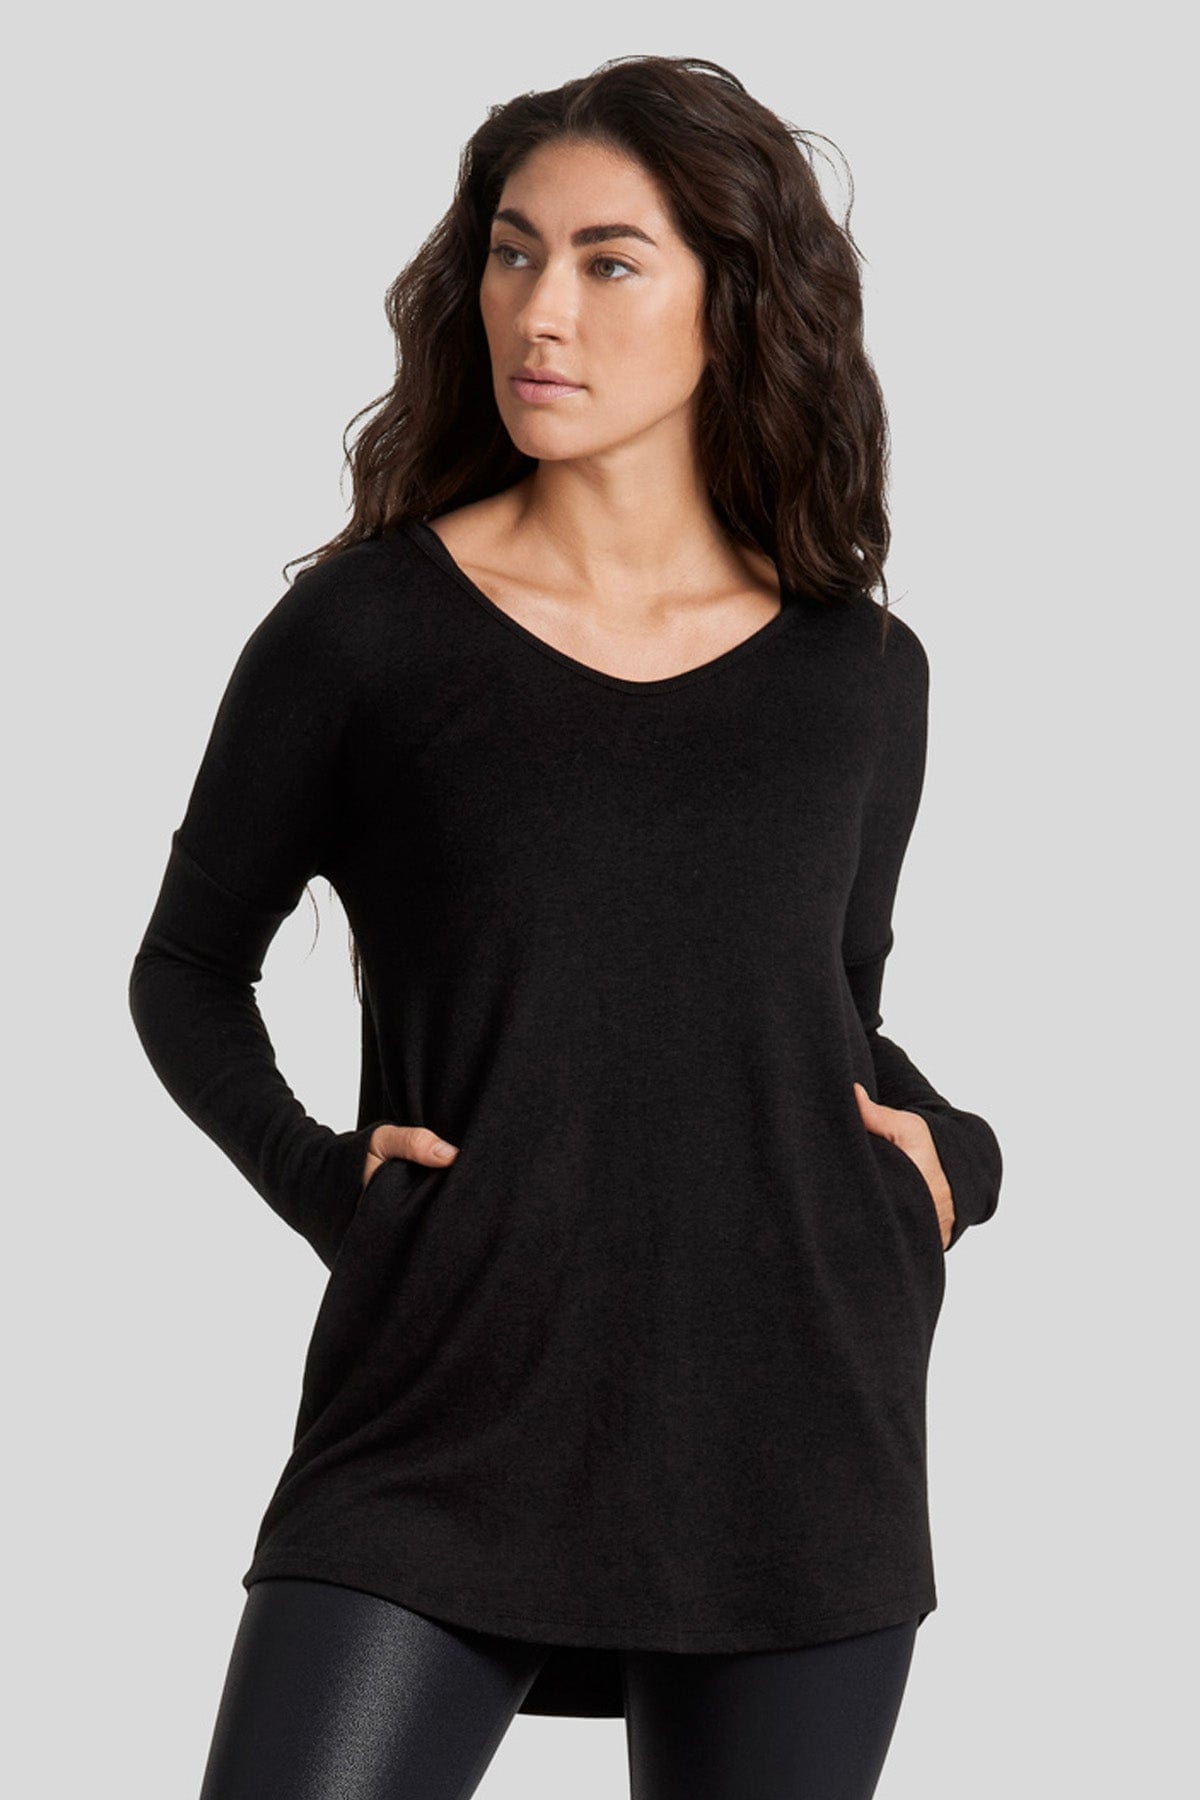 The Marie Tunic in Black has pockets and is made from a super soft modal fabric.